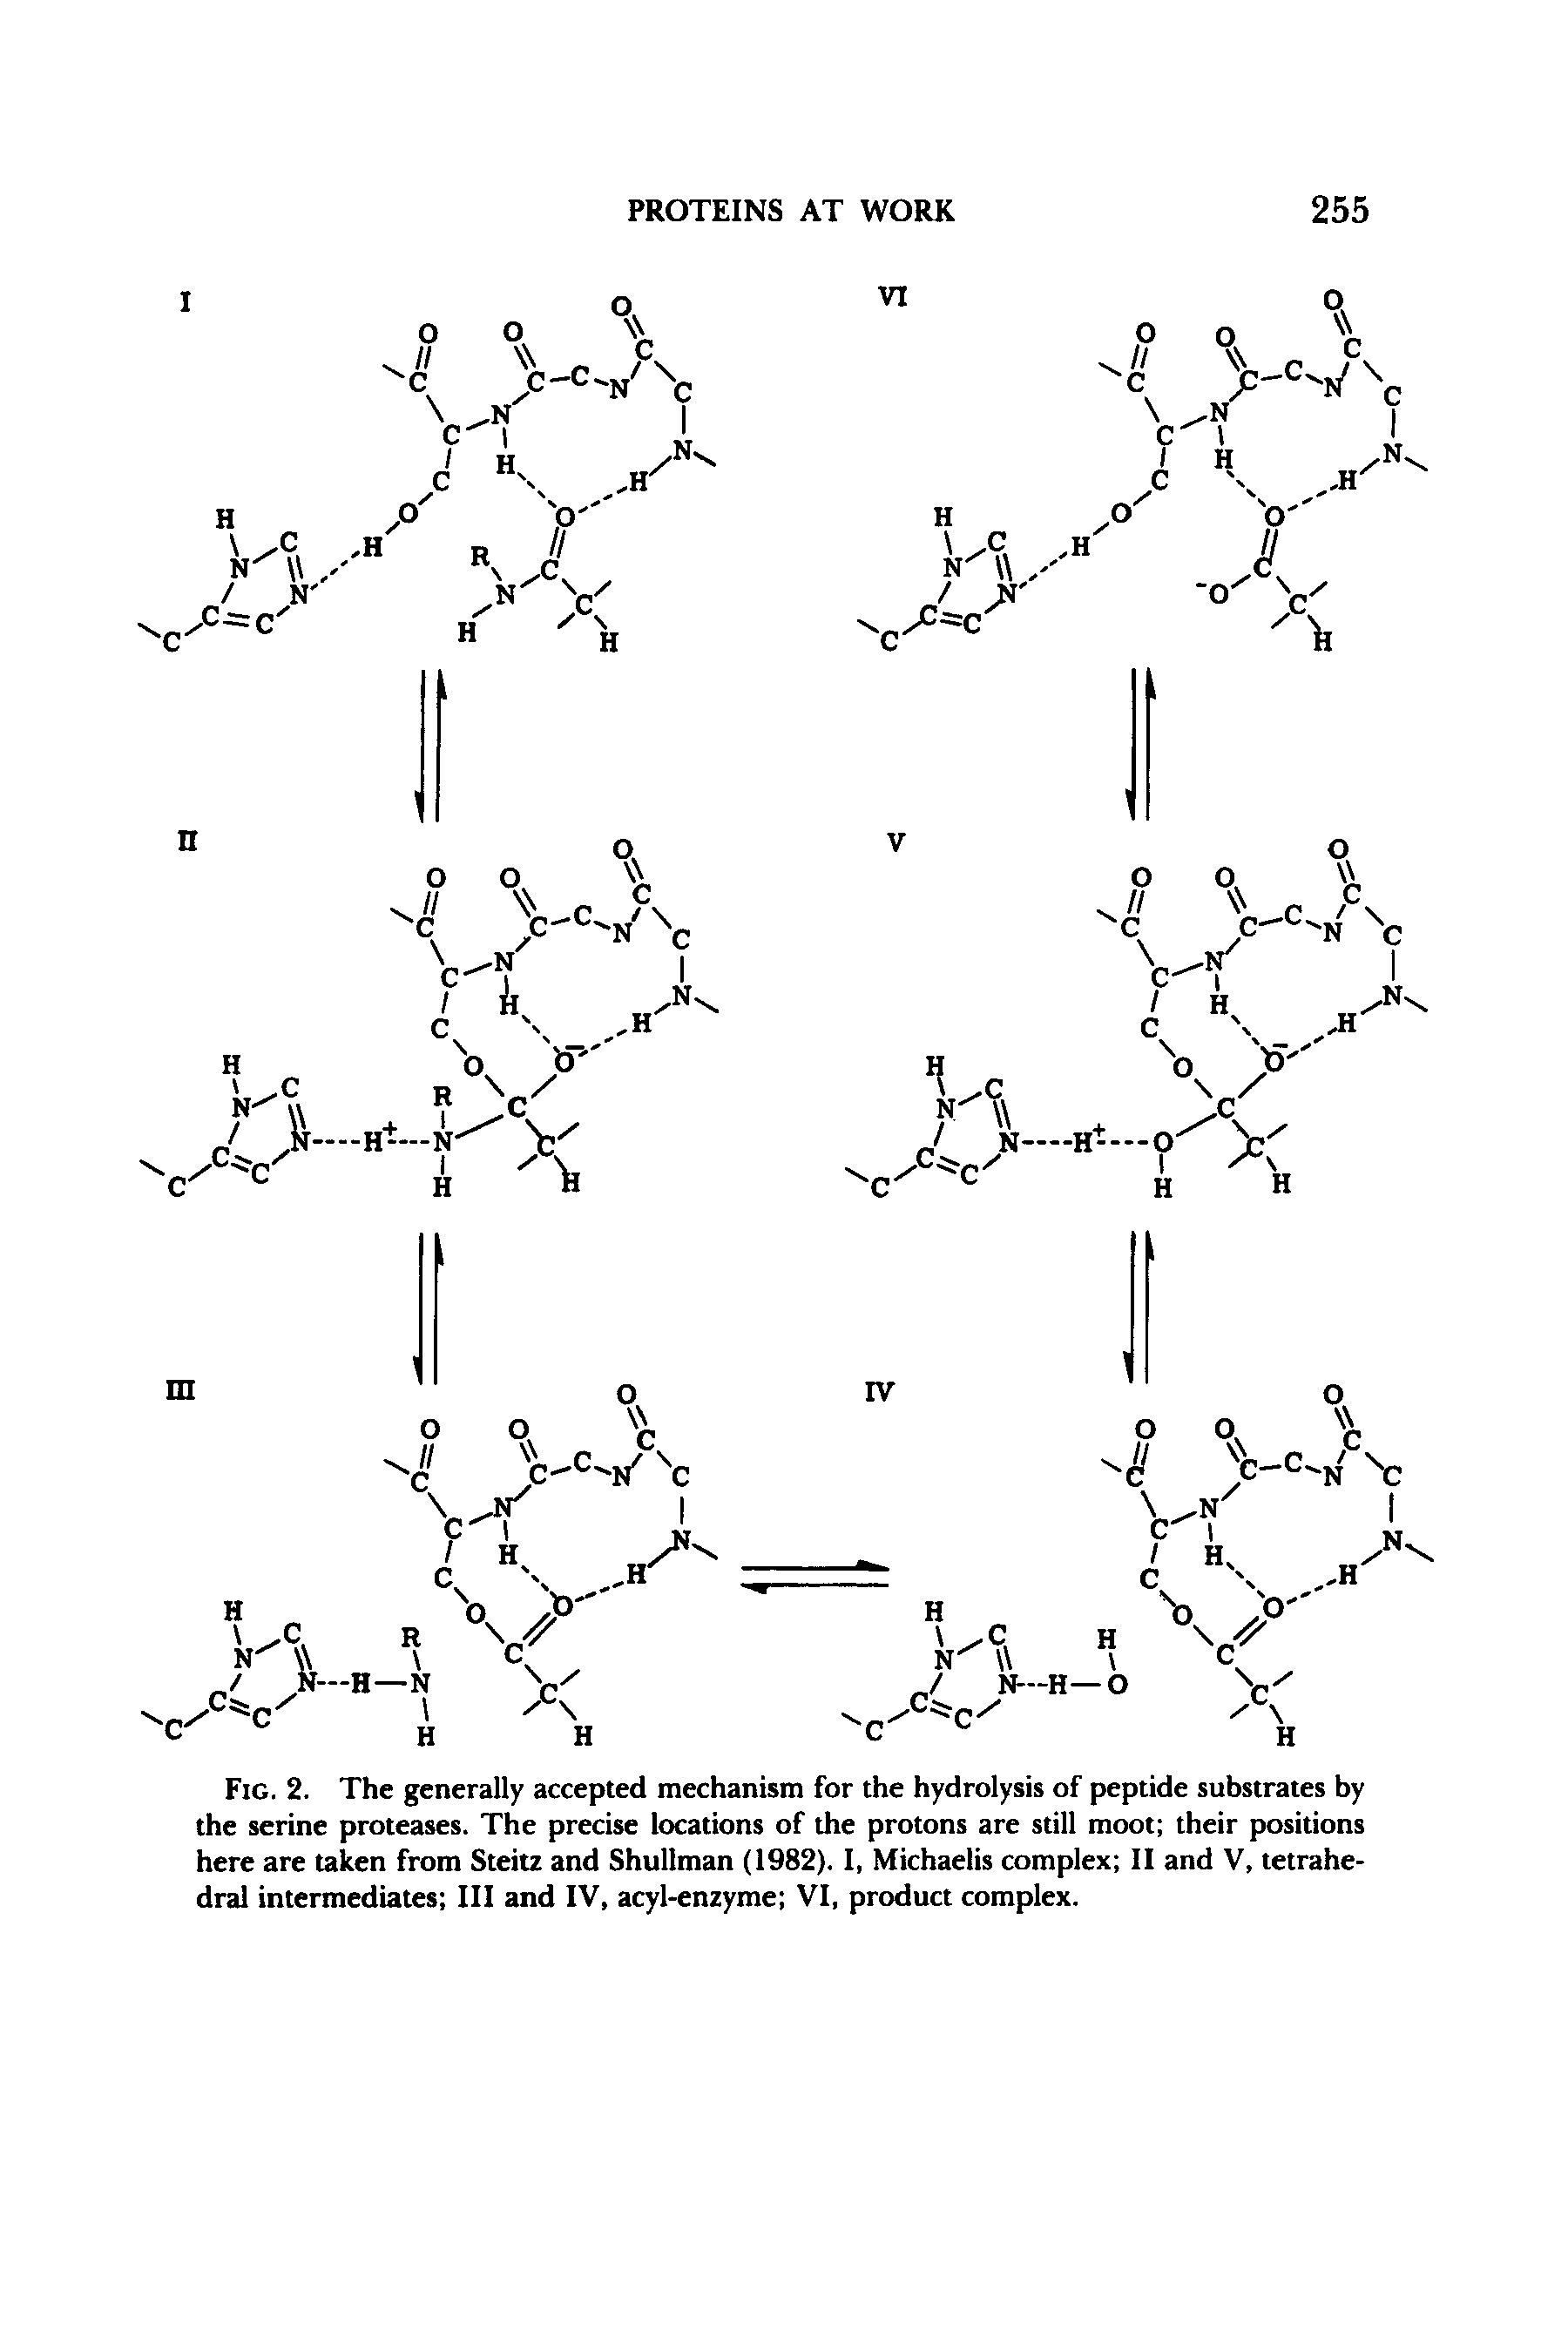 Fig. 2. The generally accepted mechanism for the hydrolysis of peptide substrates by the serine proteases. The precise locations of the protons are still moot their positions here are taken from Steitz and Shullman (1982). I, Michaelis complex II and V, tetrahedral intermediates III and IV, acyl-enzyme VI, product complex.